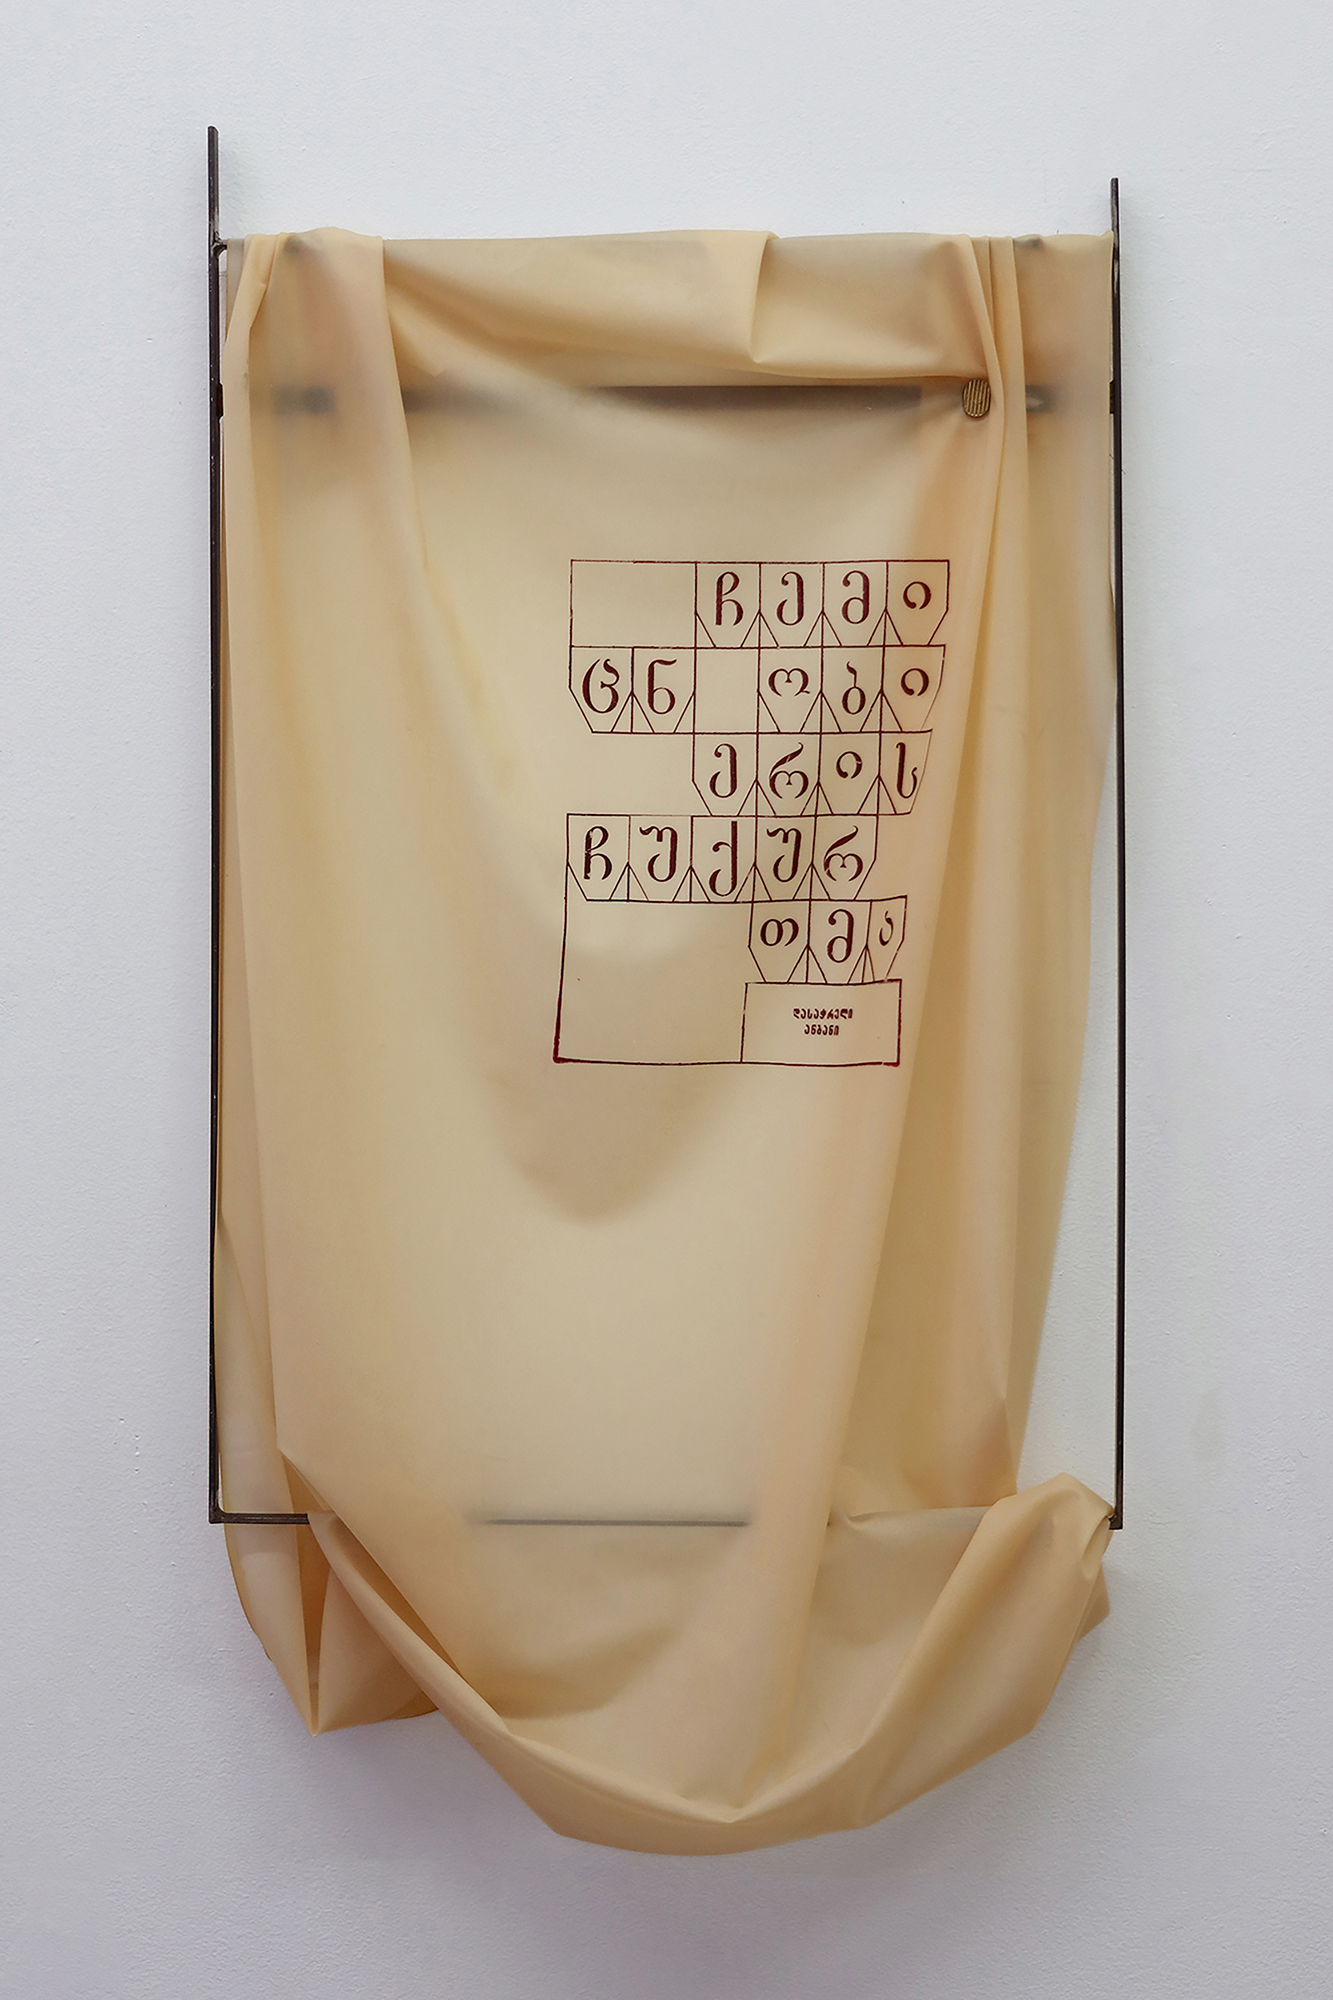 Patterns of My Consciousness (Georgian Alphabet), 2021, Oil silkscreened on latex in artist's steel frame, brass screws, 30 x 16 1/4 x 4 inches.
Image courtesy the artist and Marisa Newman Projects, NY.